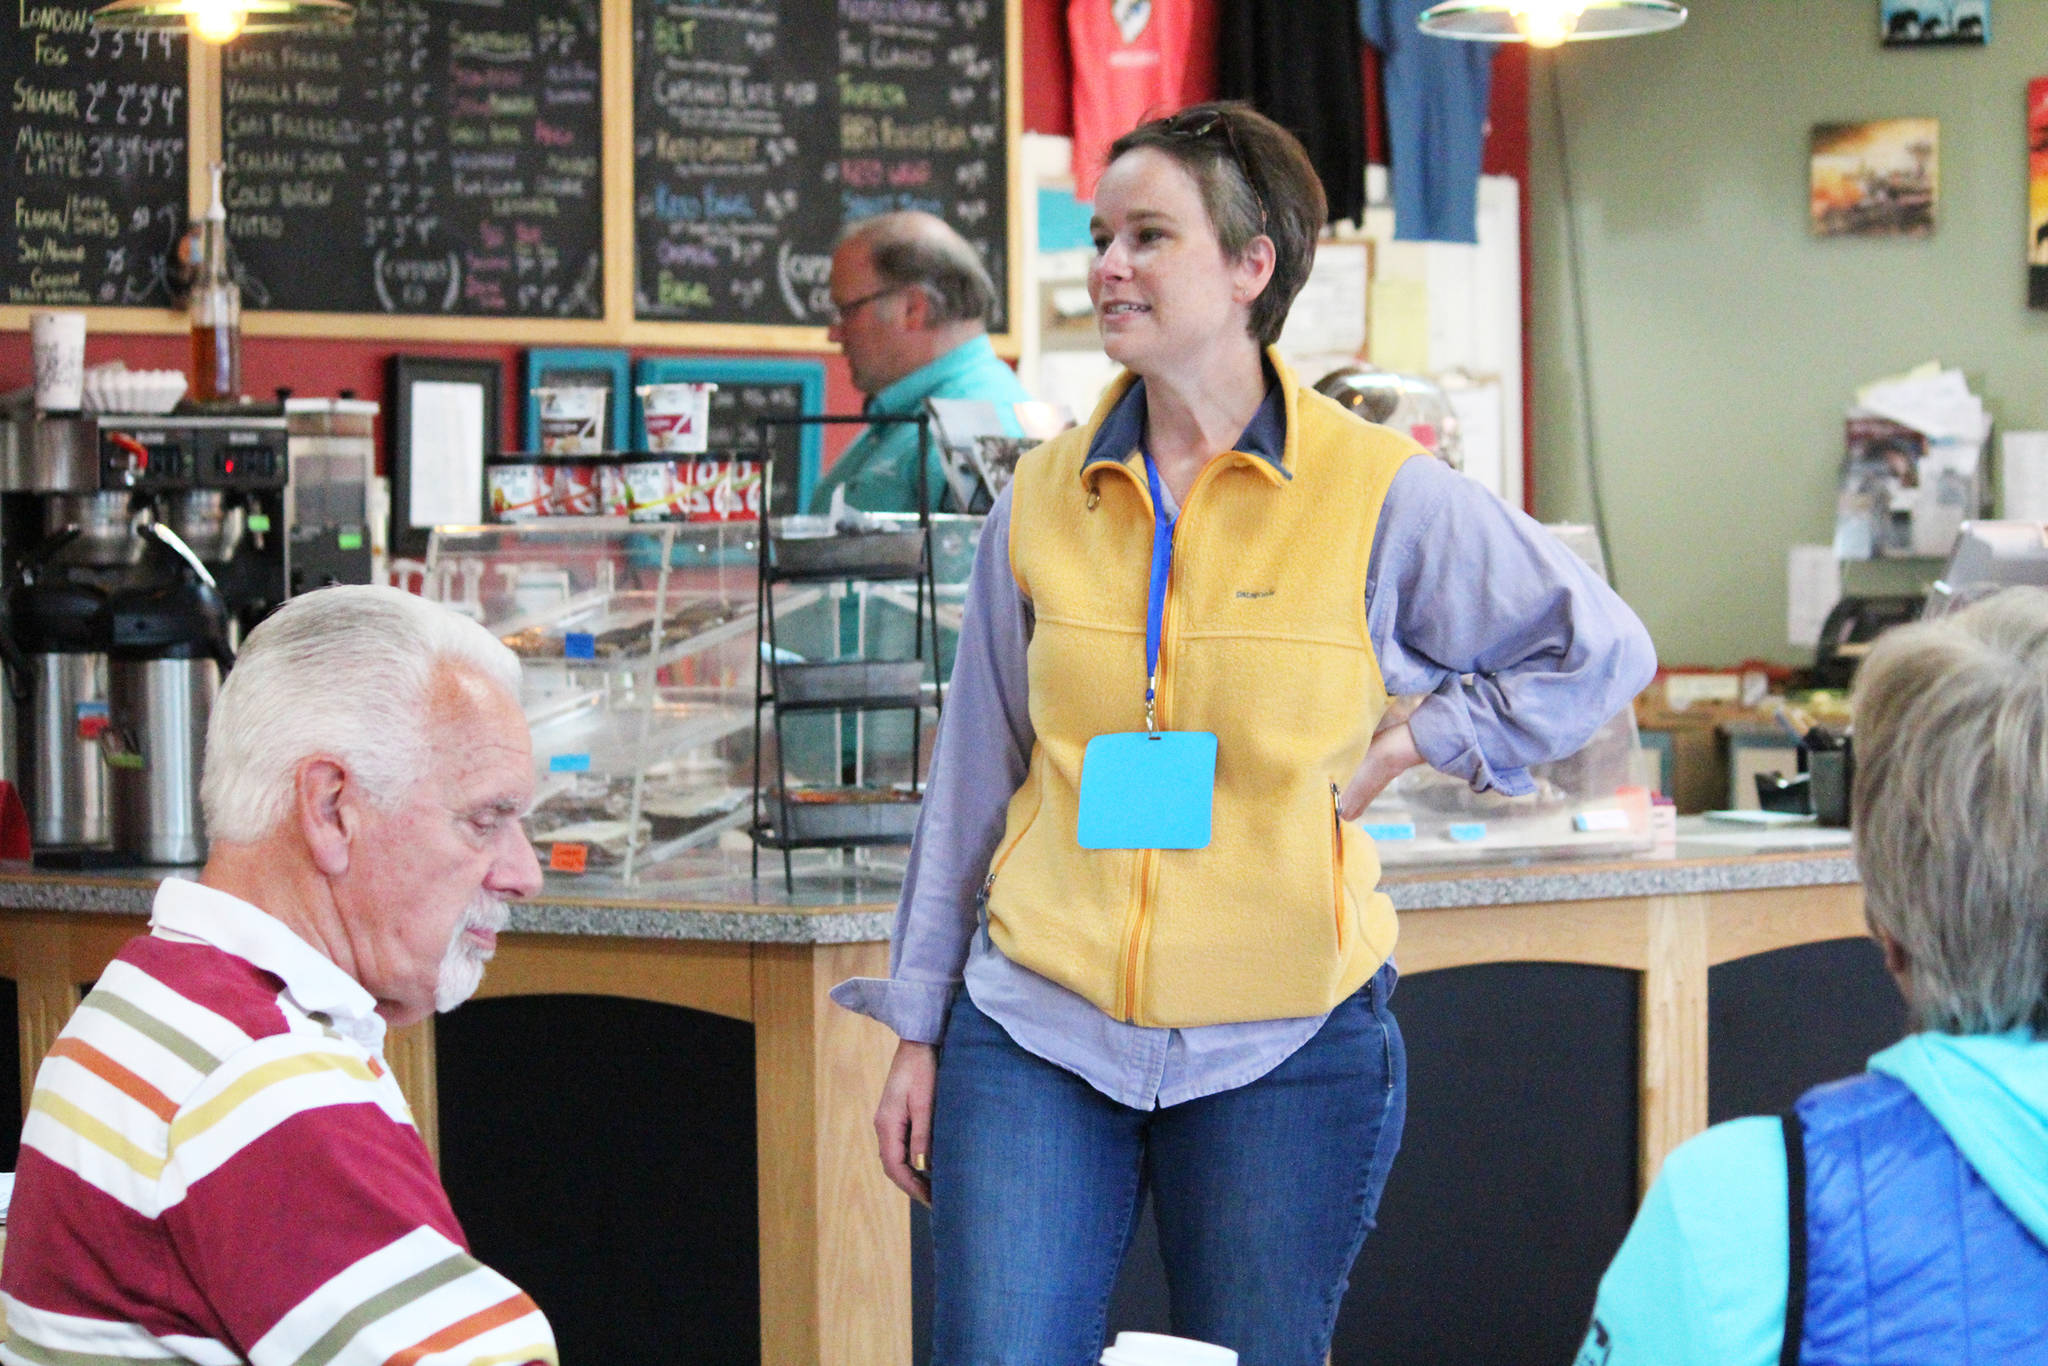 Rep. Sarah Vance (R-Homer) addresses a crowd of people during a legislative update meeting Thursday, Aug. 29, 2019 at Captain’s Coffee in Homer, Alaska. (Photo by Megan Pacer/Homer News)